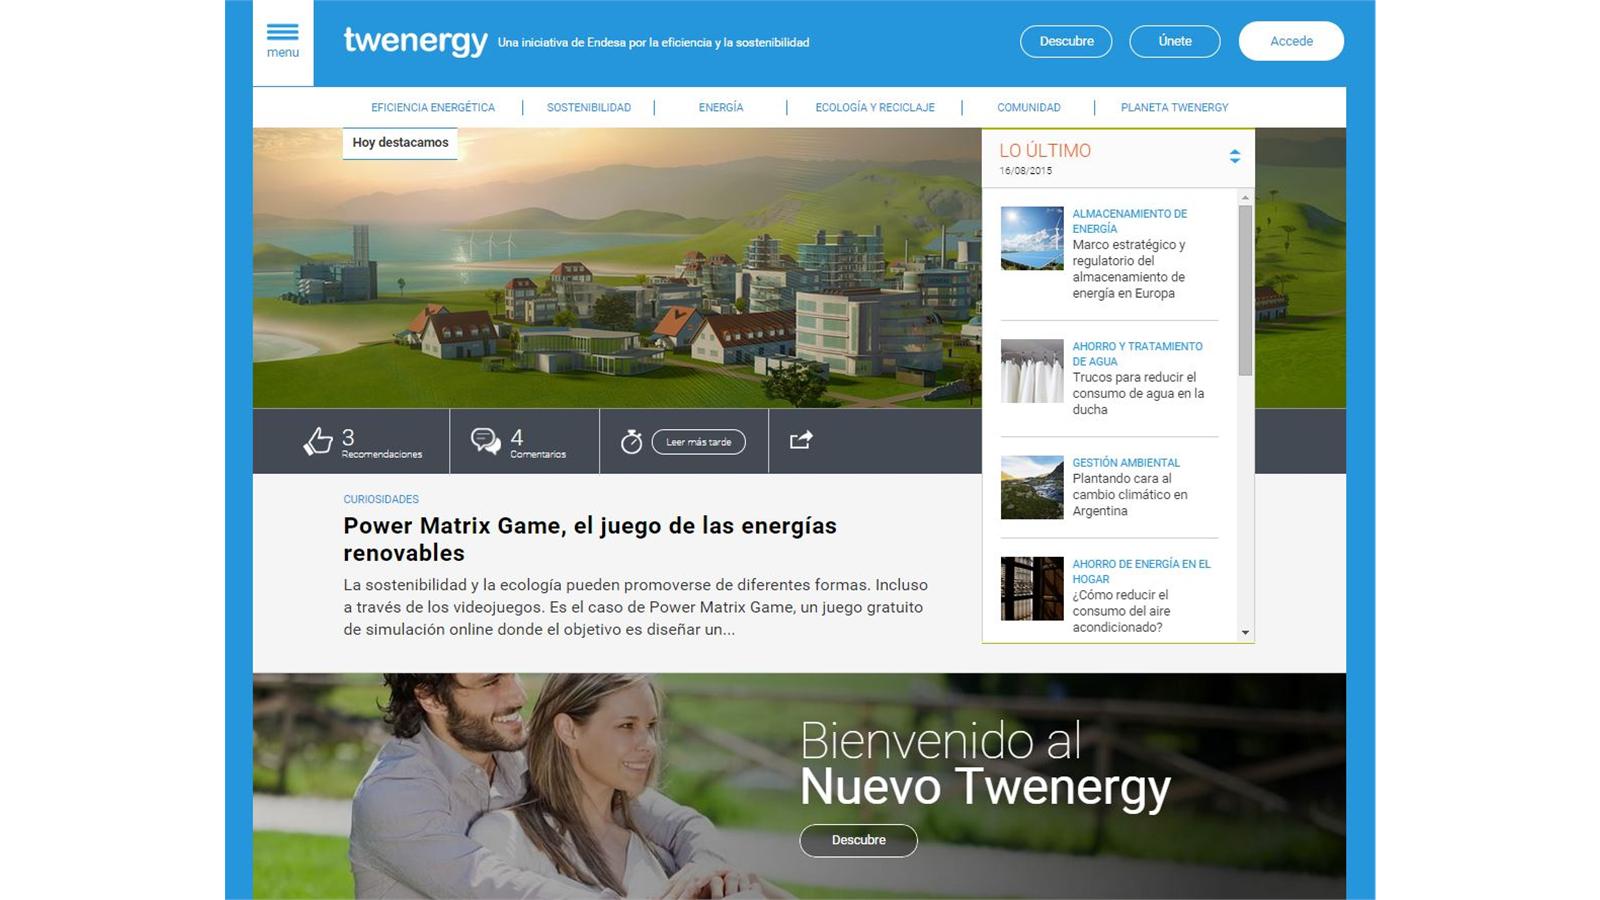 Twenergy.com, Endesa's website for promoting energy efficiency and responsible energy consumption, has now reached over 11.4 million visits 